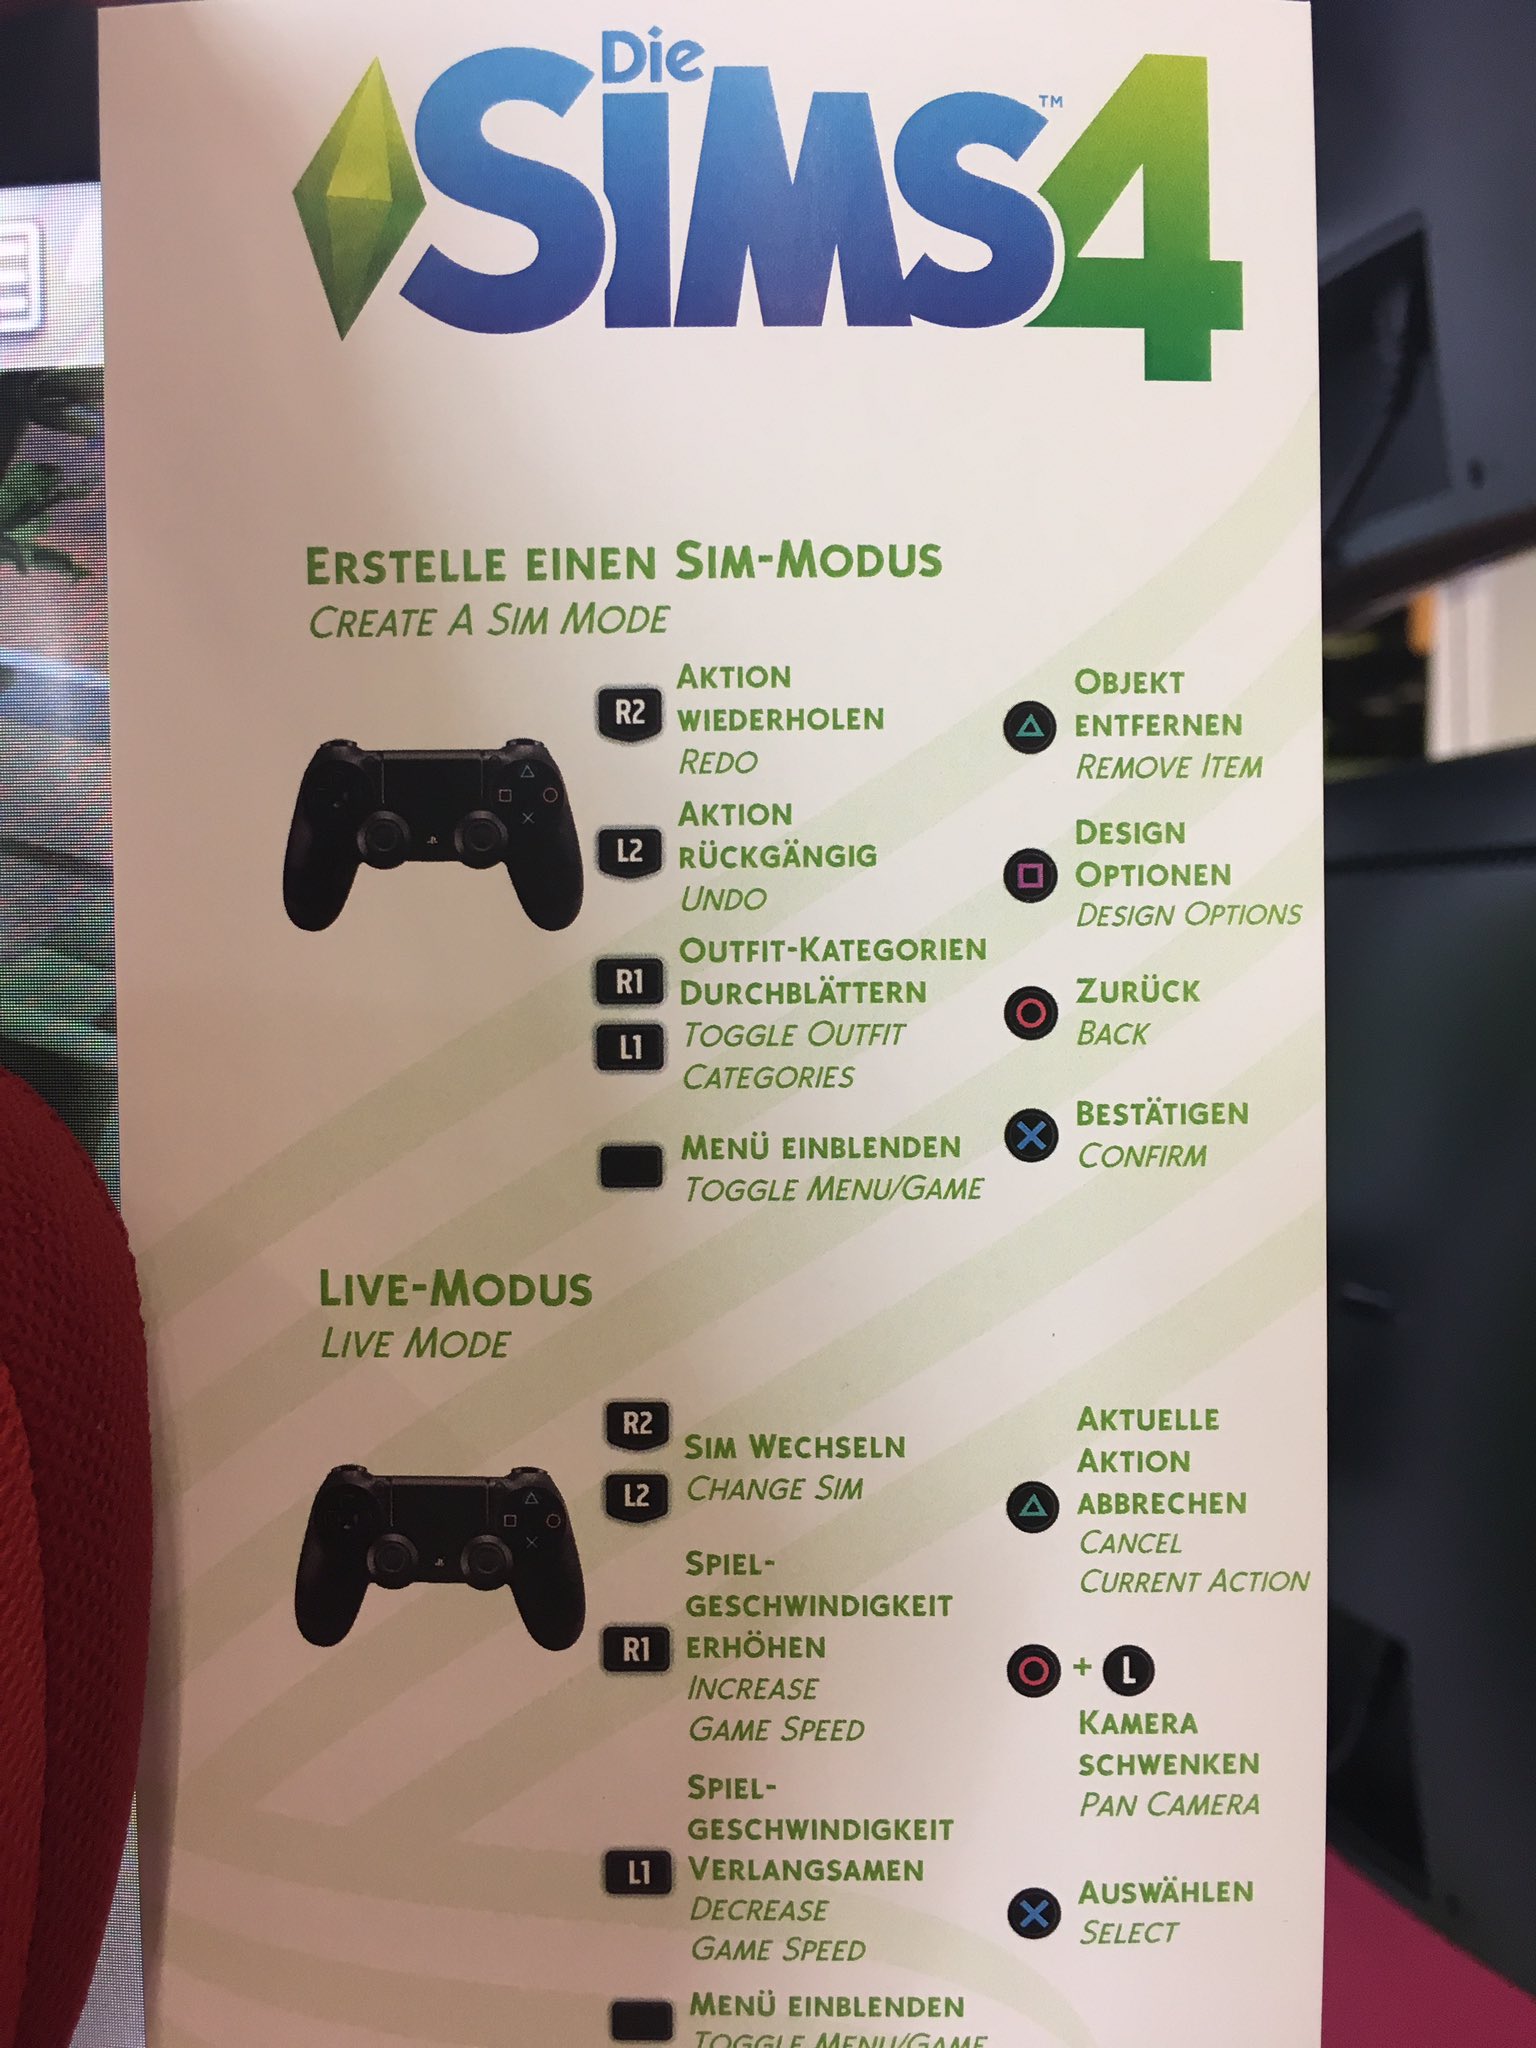 HOW TO USE CHEATS / The Sims 4 Console (PS4, Xbox One) 